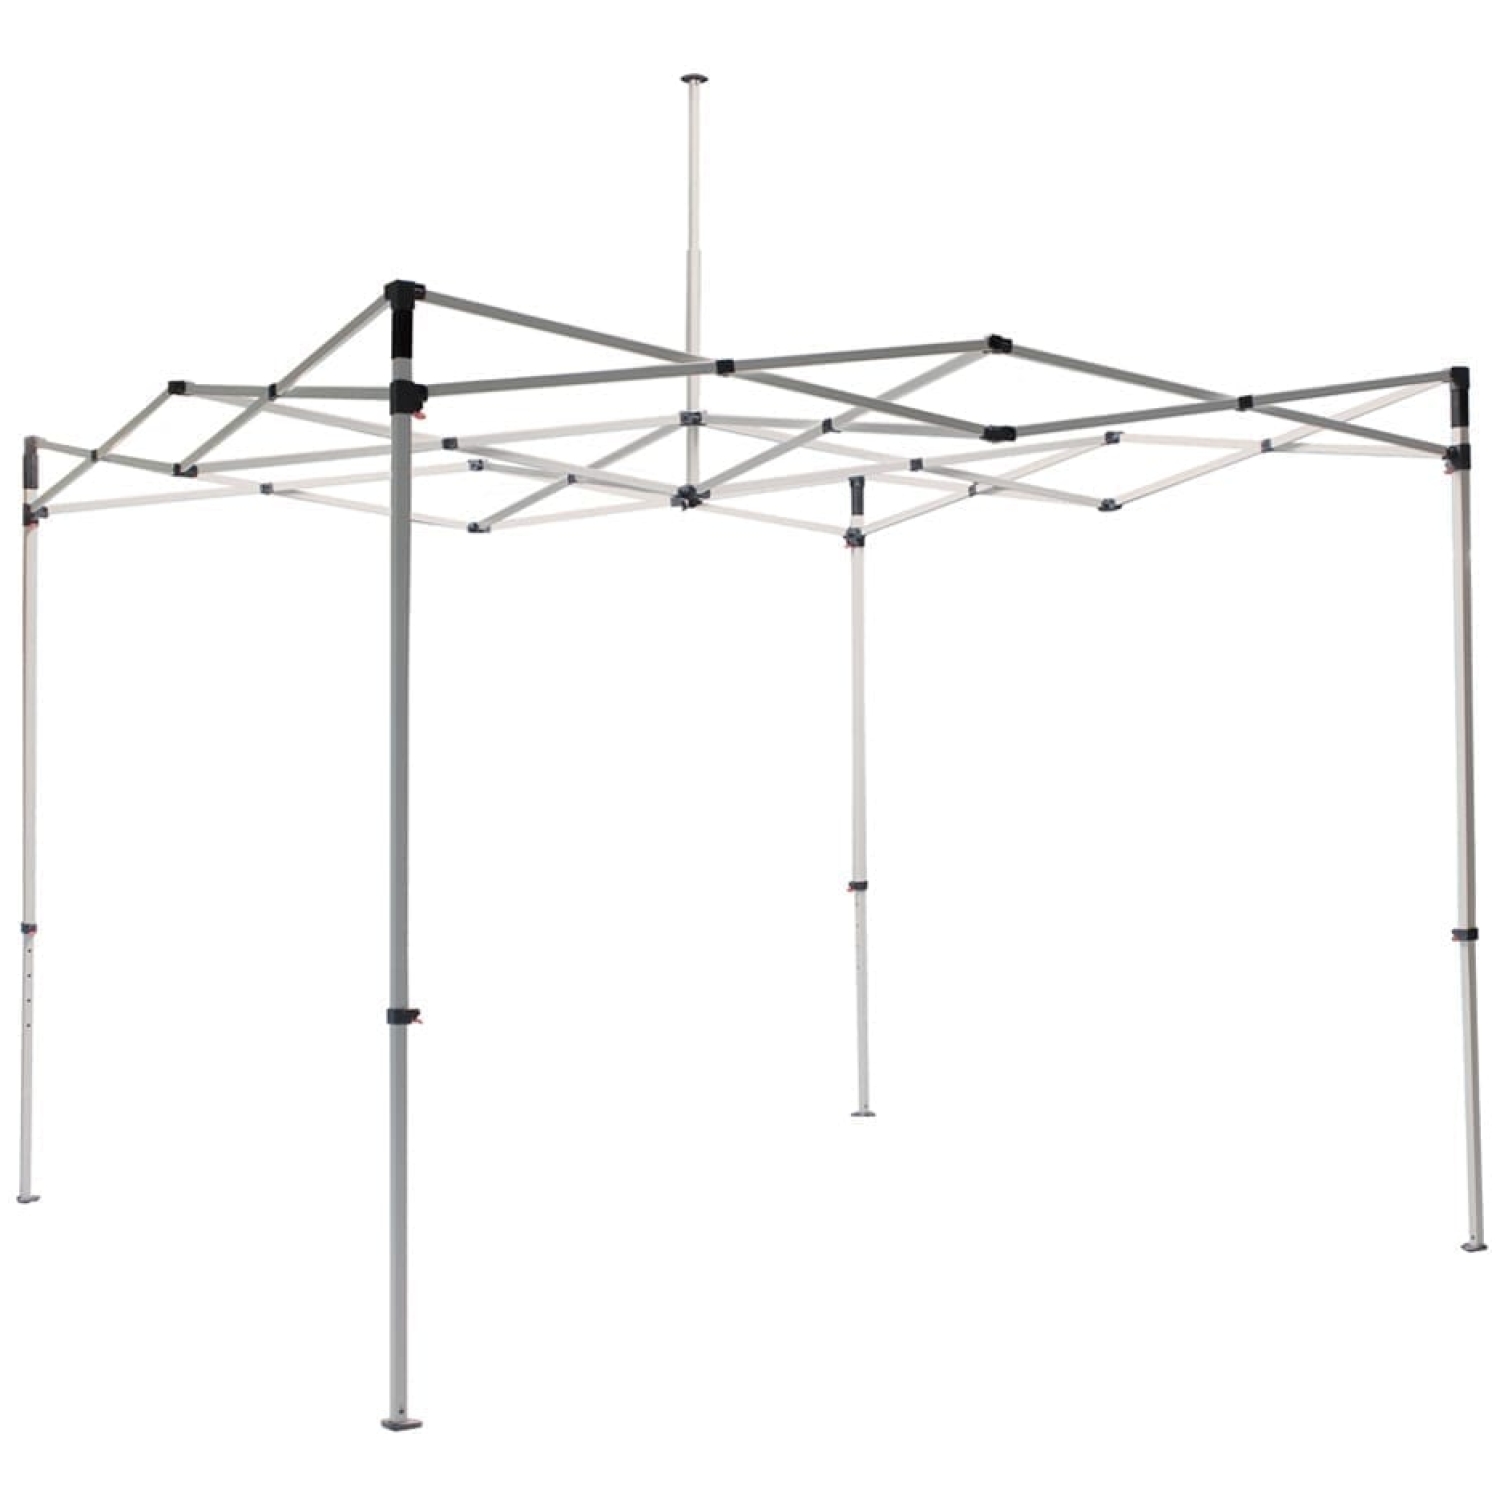 Casita Steel Canopy 10ft Frame Only